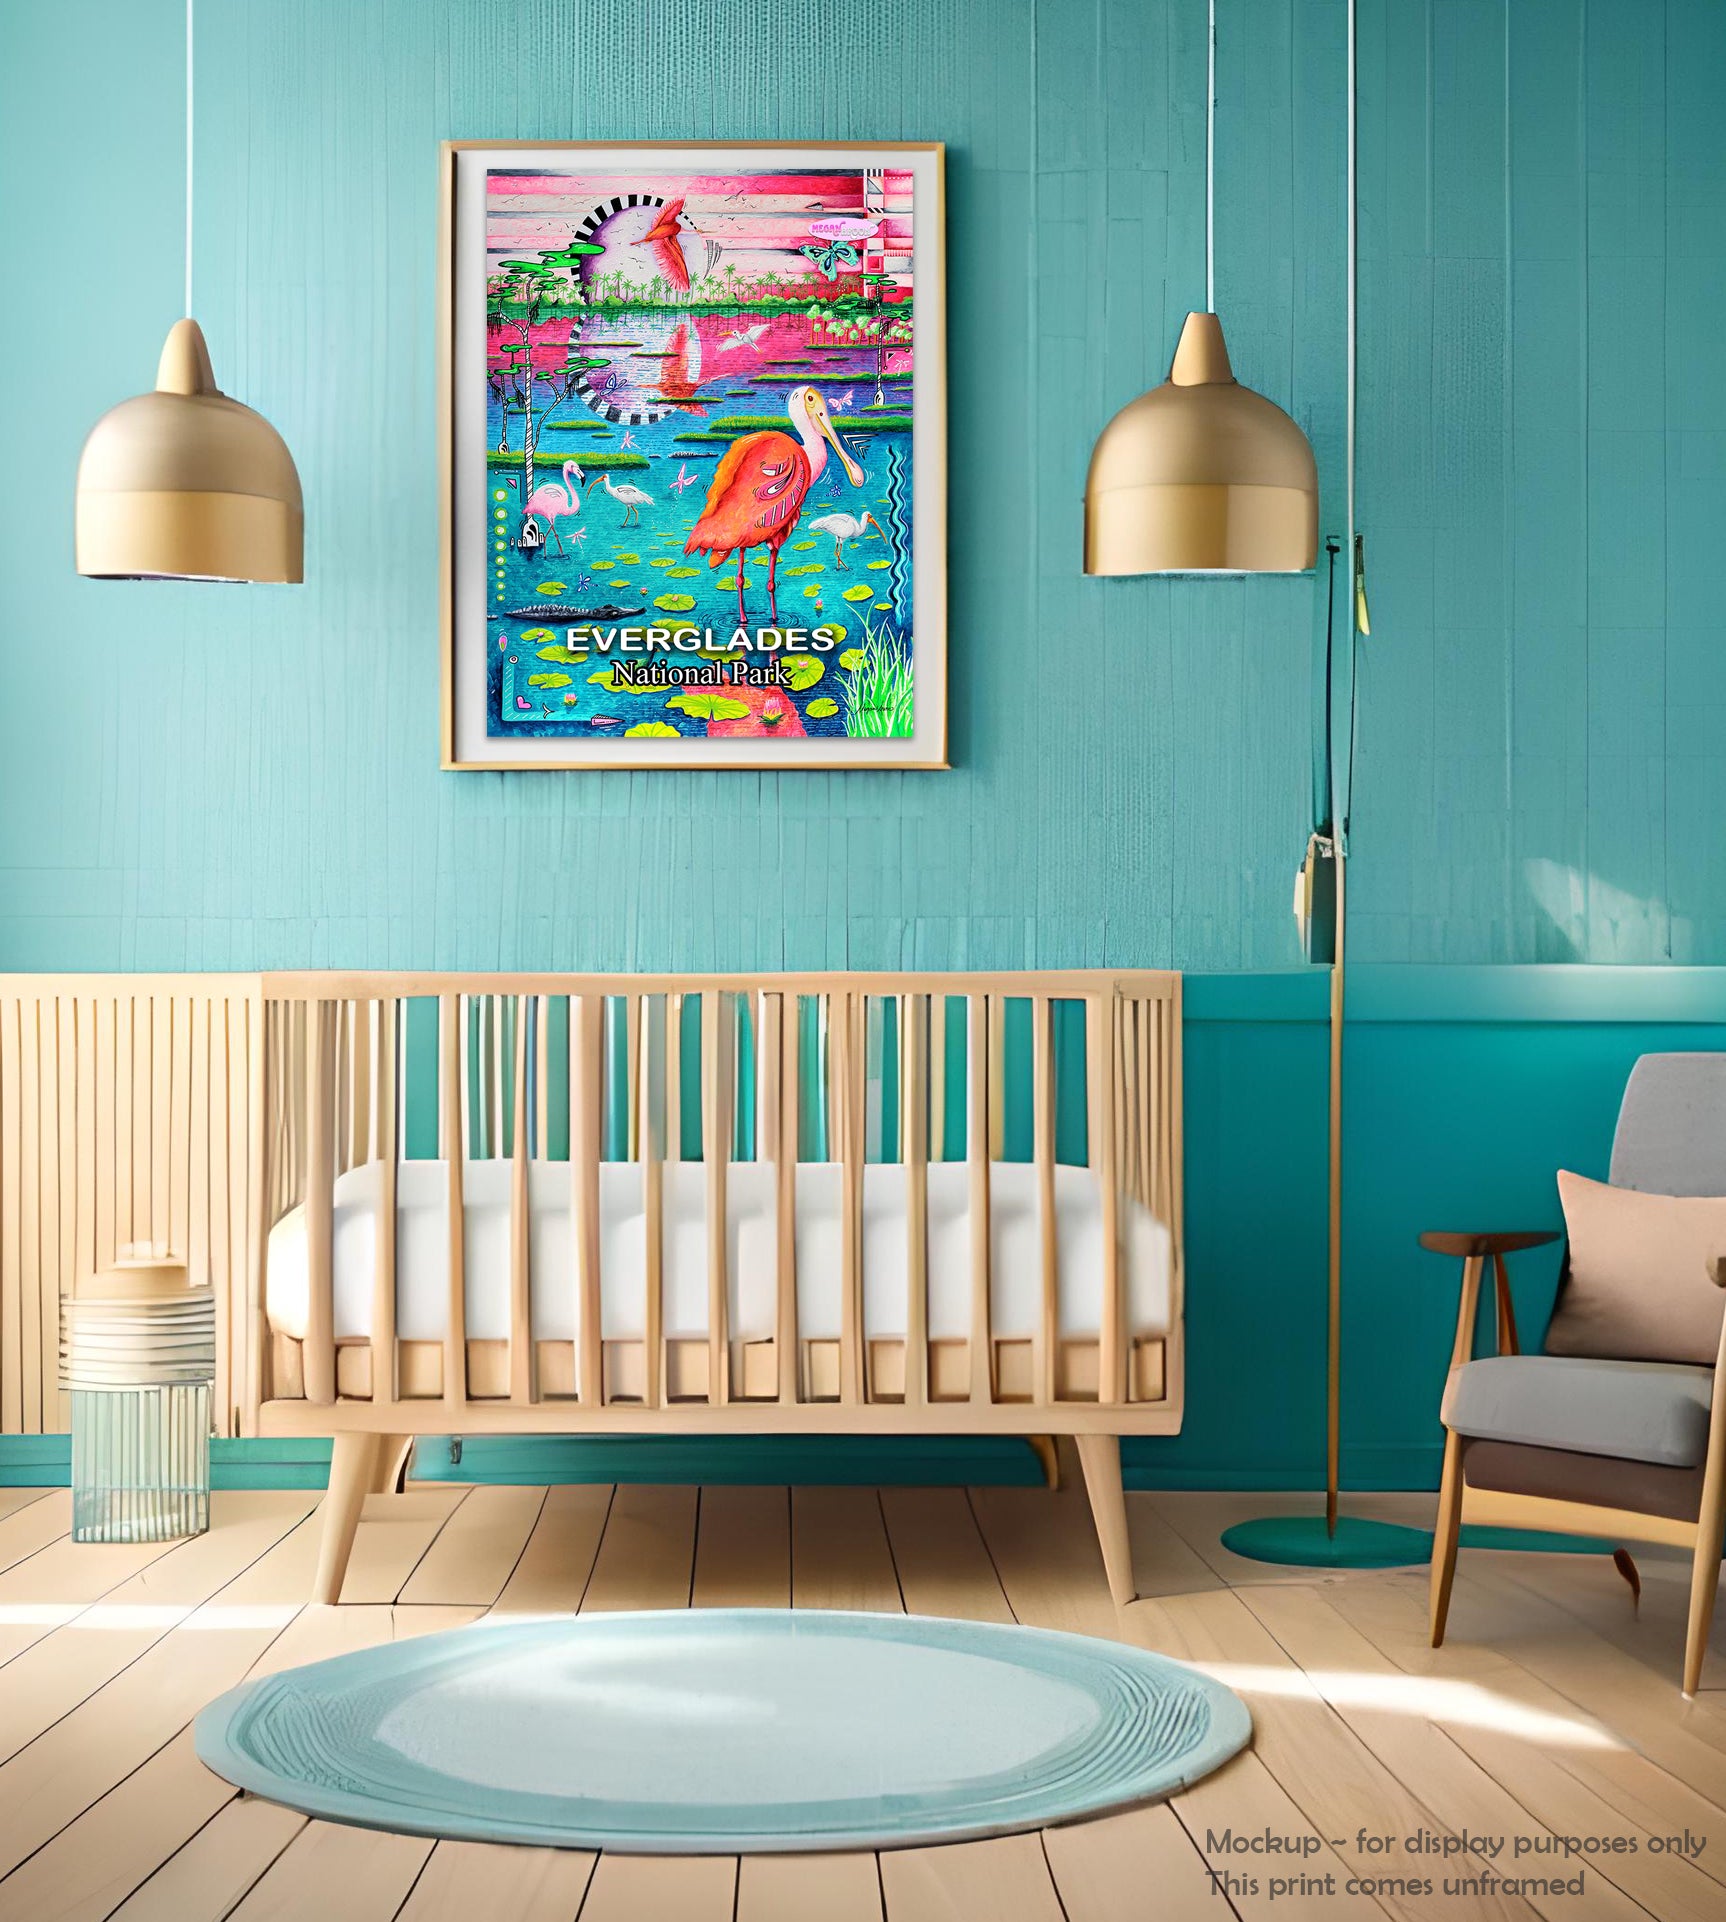 everglades national park travel poster print in a whimsical, colorful pop art style by traveling artist meganaroon in a baby nursery room framed and matted